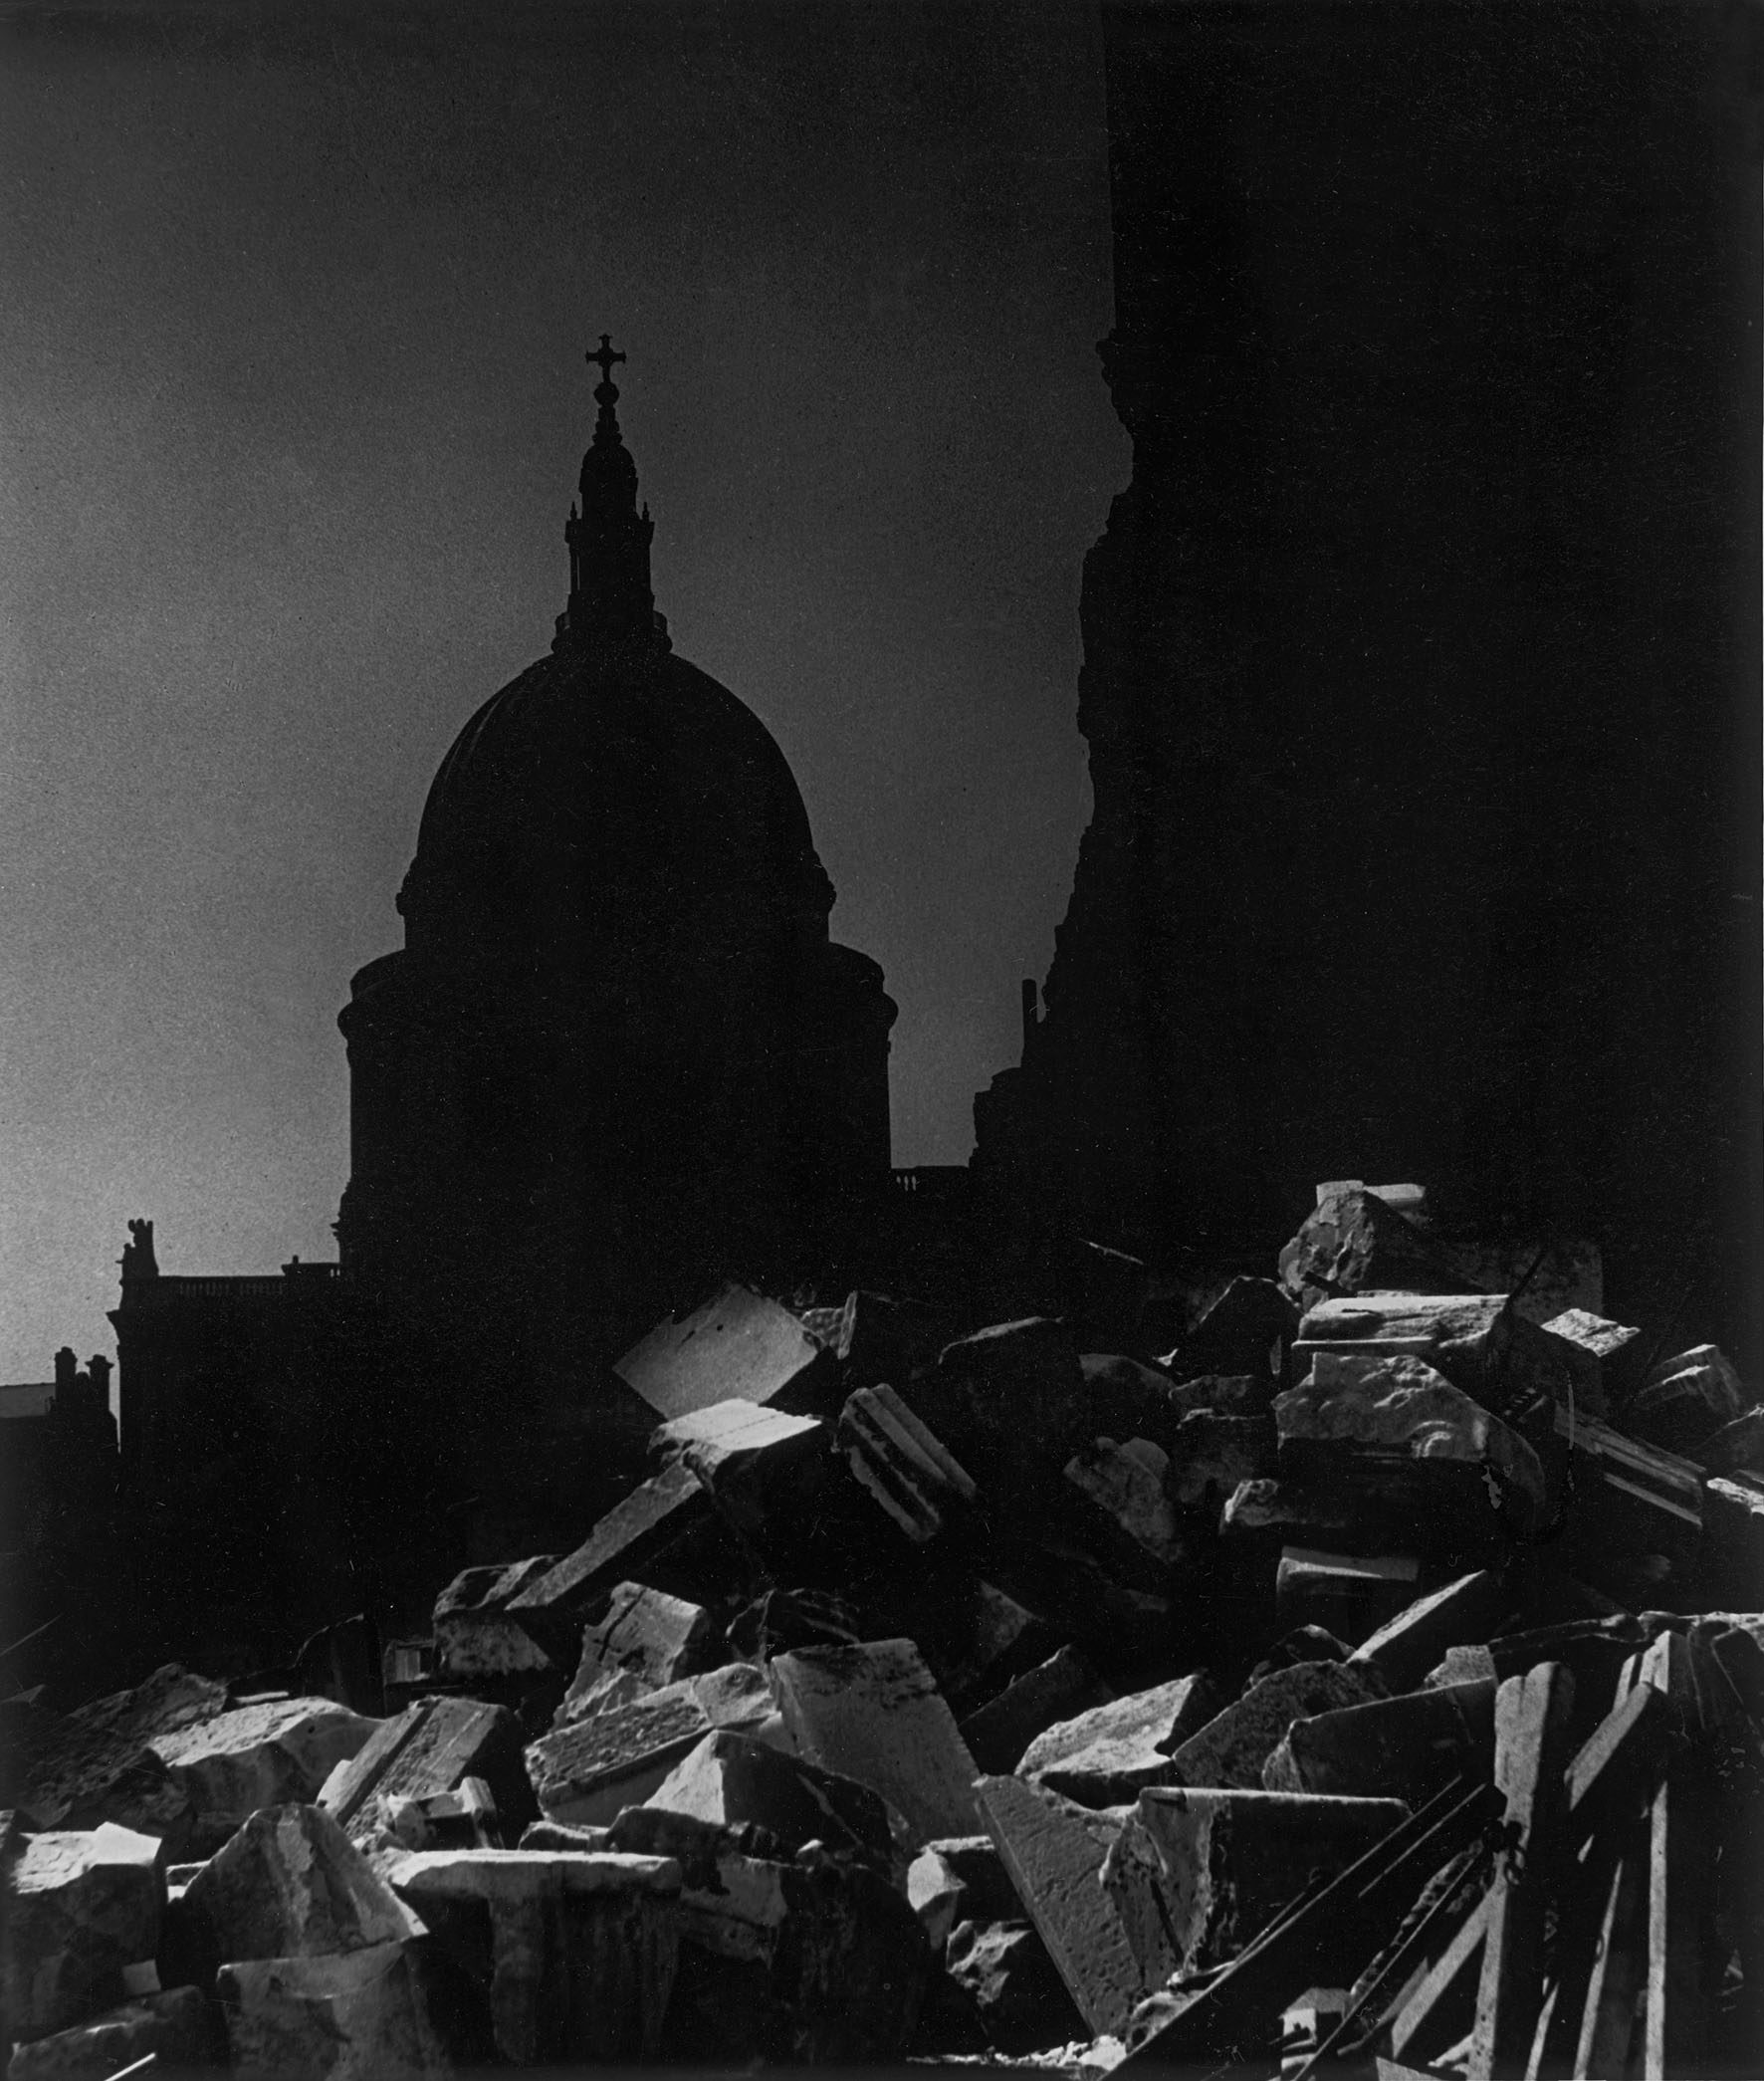 Debris in front of St Pauls Cathedral in London at night in 1942